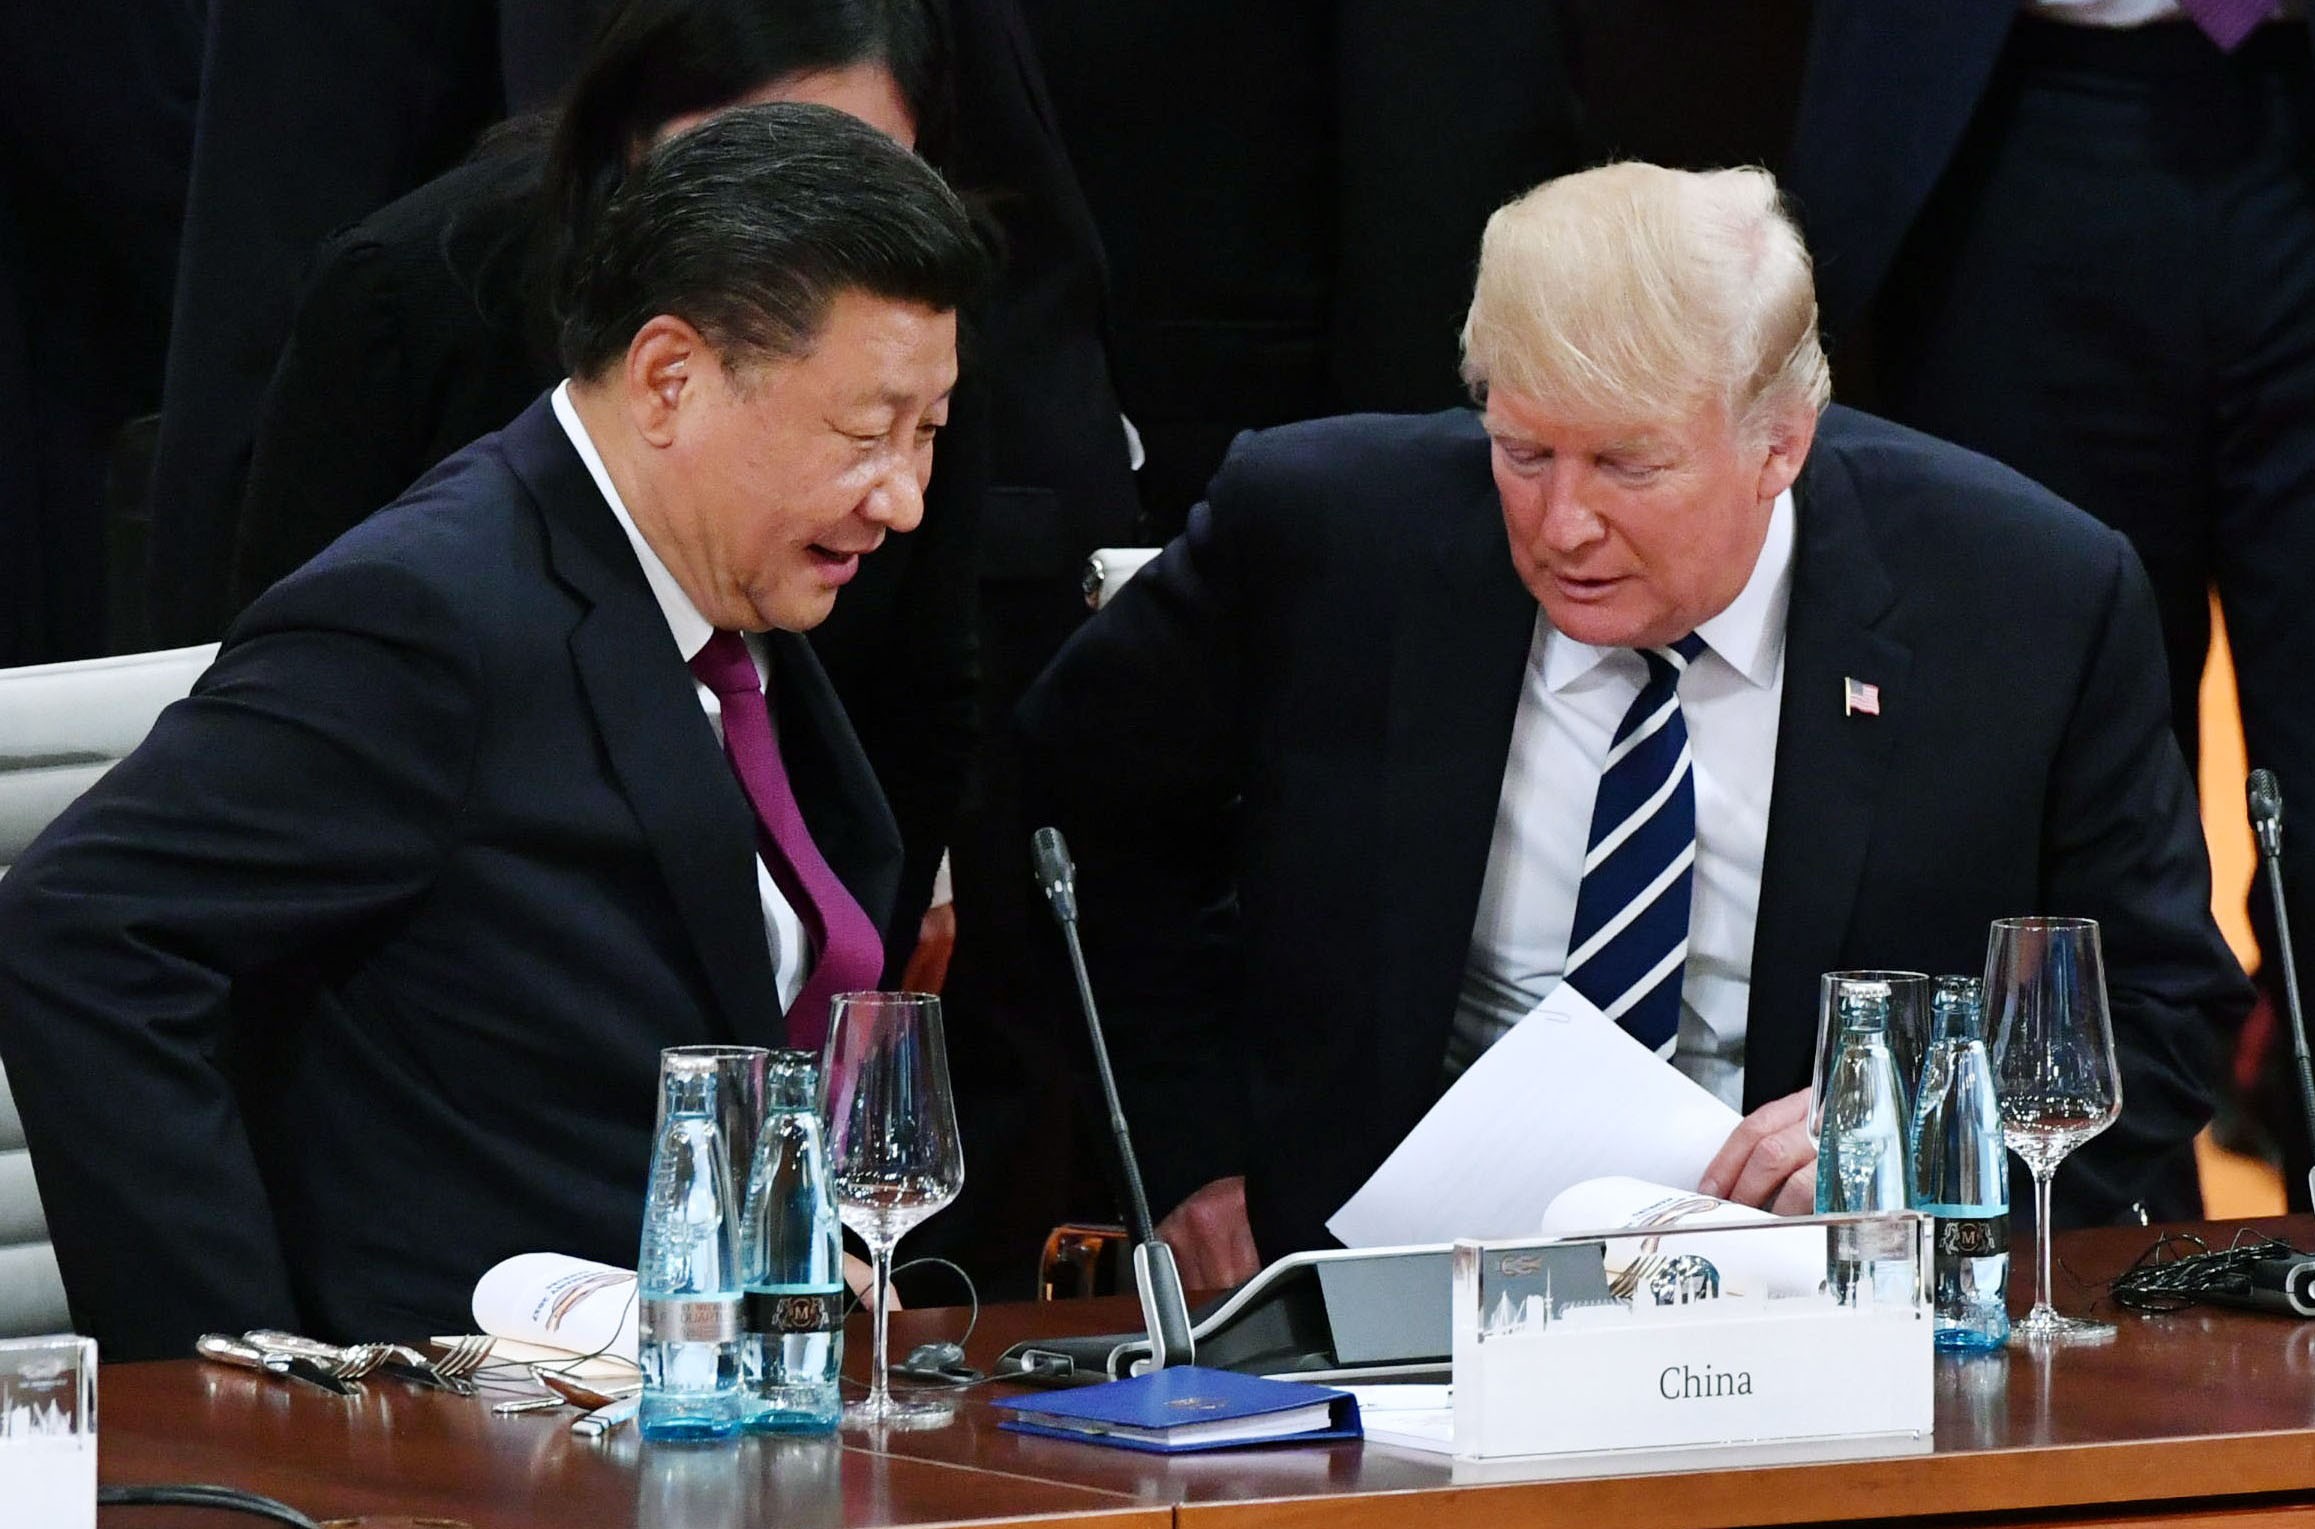 Chinese President Xi Jinping (left) and US President Donald Trump share a moment during friendlier times at a G20 summit meeting in Hamburg, Germany, in July 2017. With tensions between China and the US having escalated into a trade war, all eyes will be on the two leaders at this year’s meeting. Photo: Kyodo